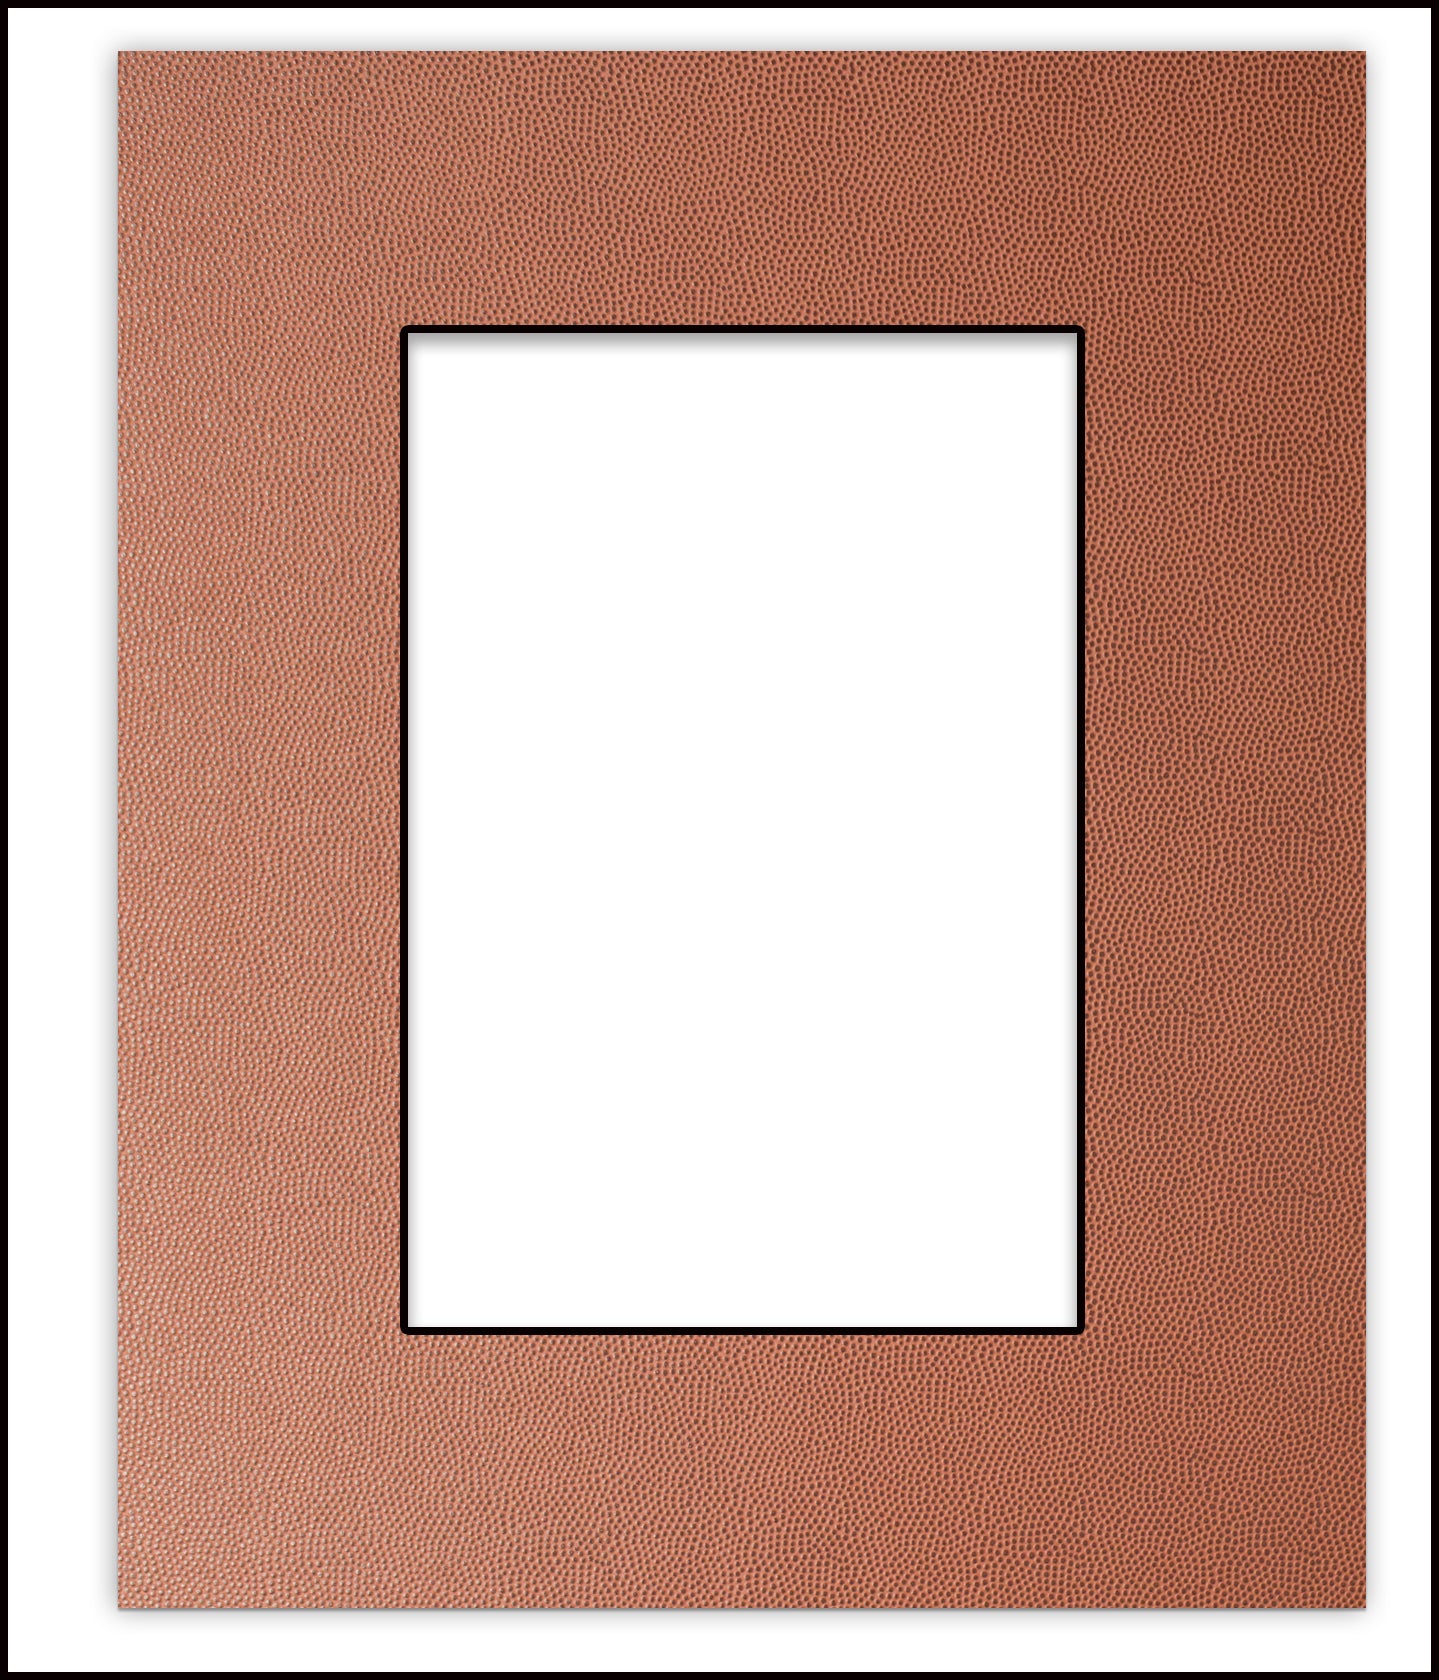 12x18 Mat for 18x24 Frame - Precut Mat Board Acid-Free Show Kit with Backing Board, and Clear Bags Textured Black 12x18 Photo Matte for A 18x24